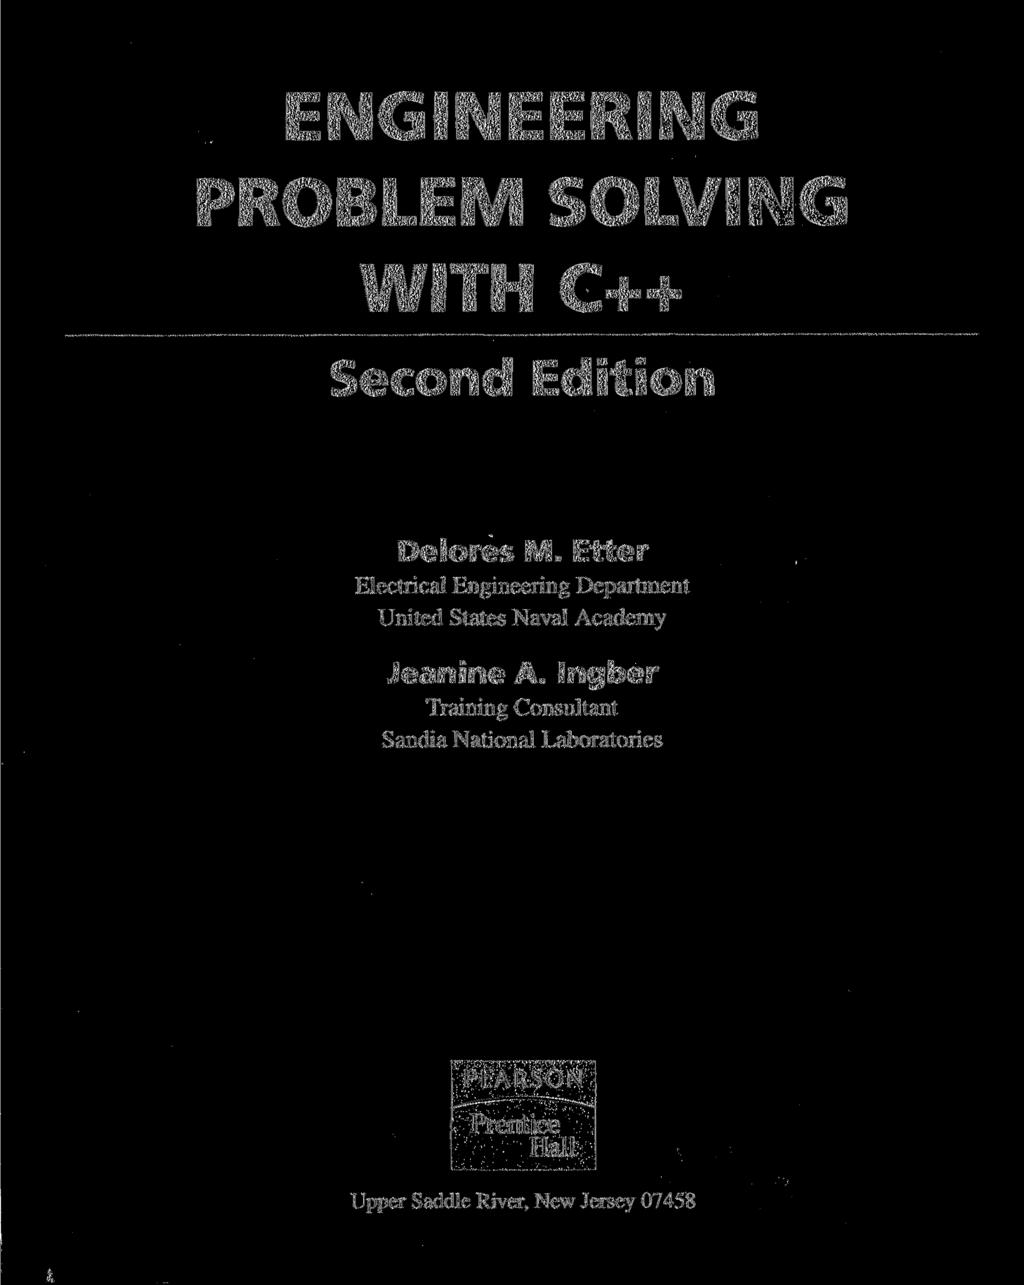 ENGINEERING PROBLEM SOLVING WITH C++ Second Edition Delores M.